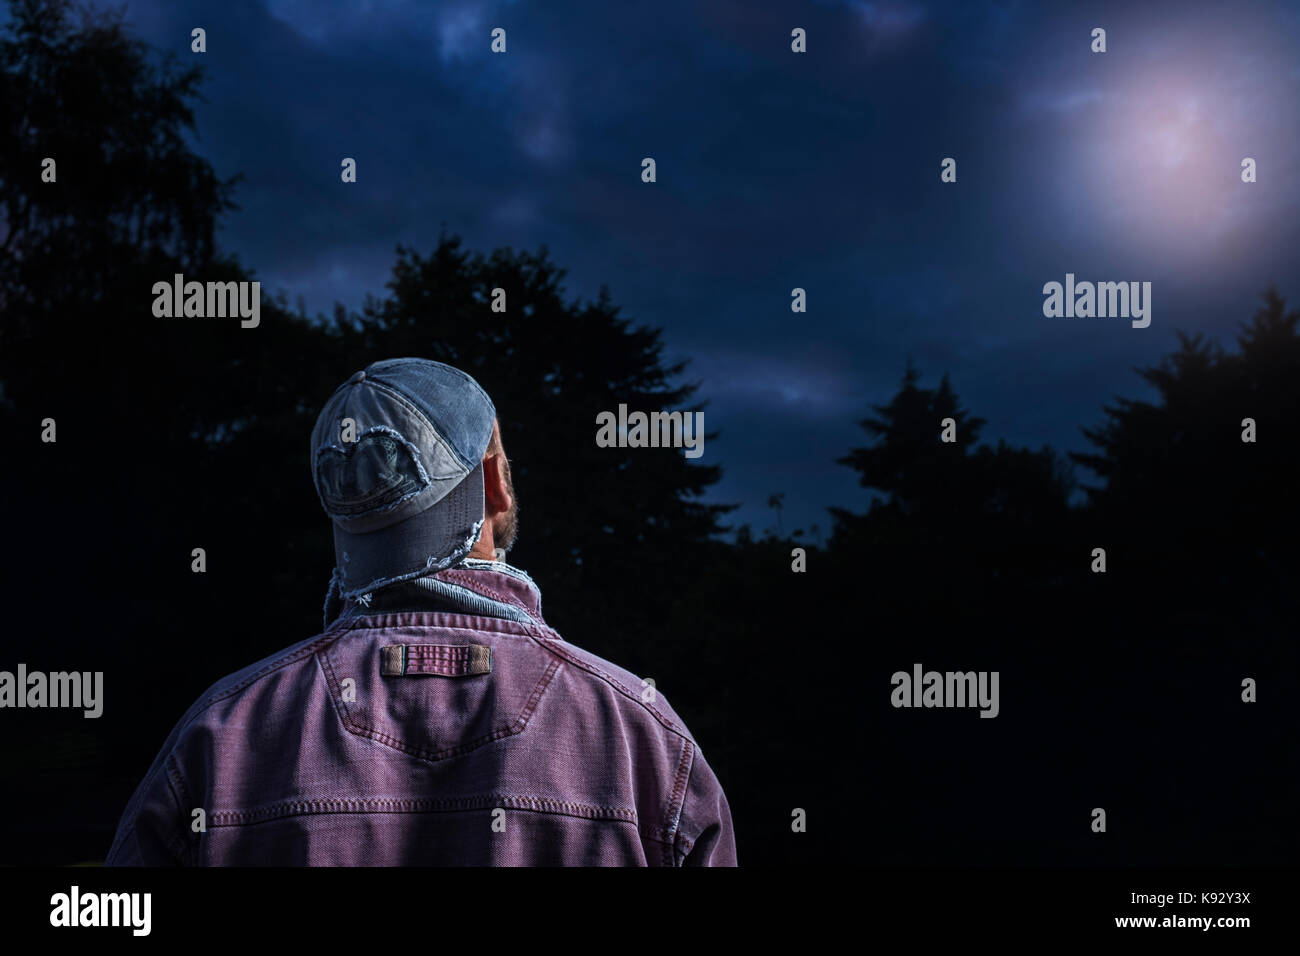 A Man looking towards a glow in the night sky. Stock Photo